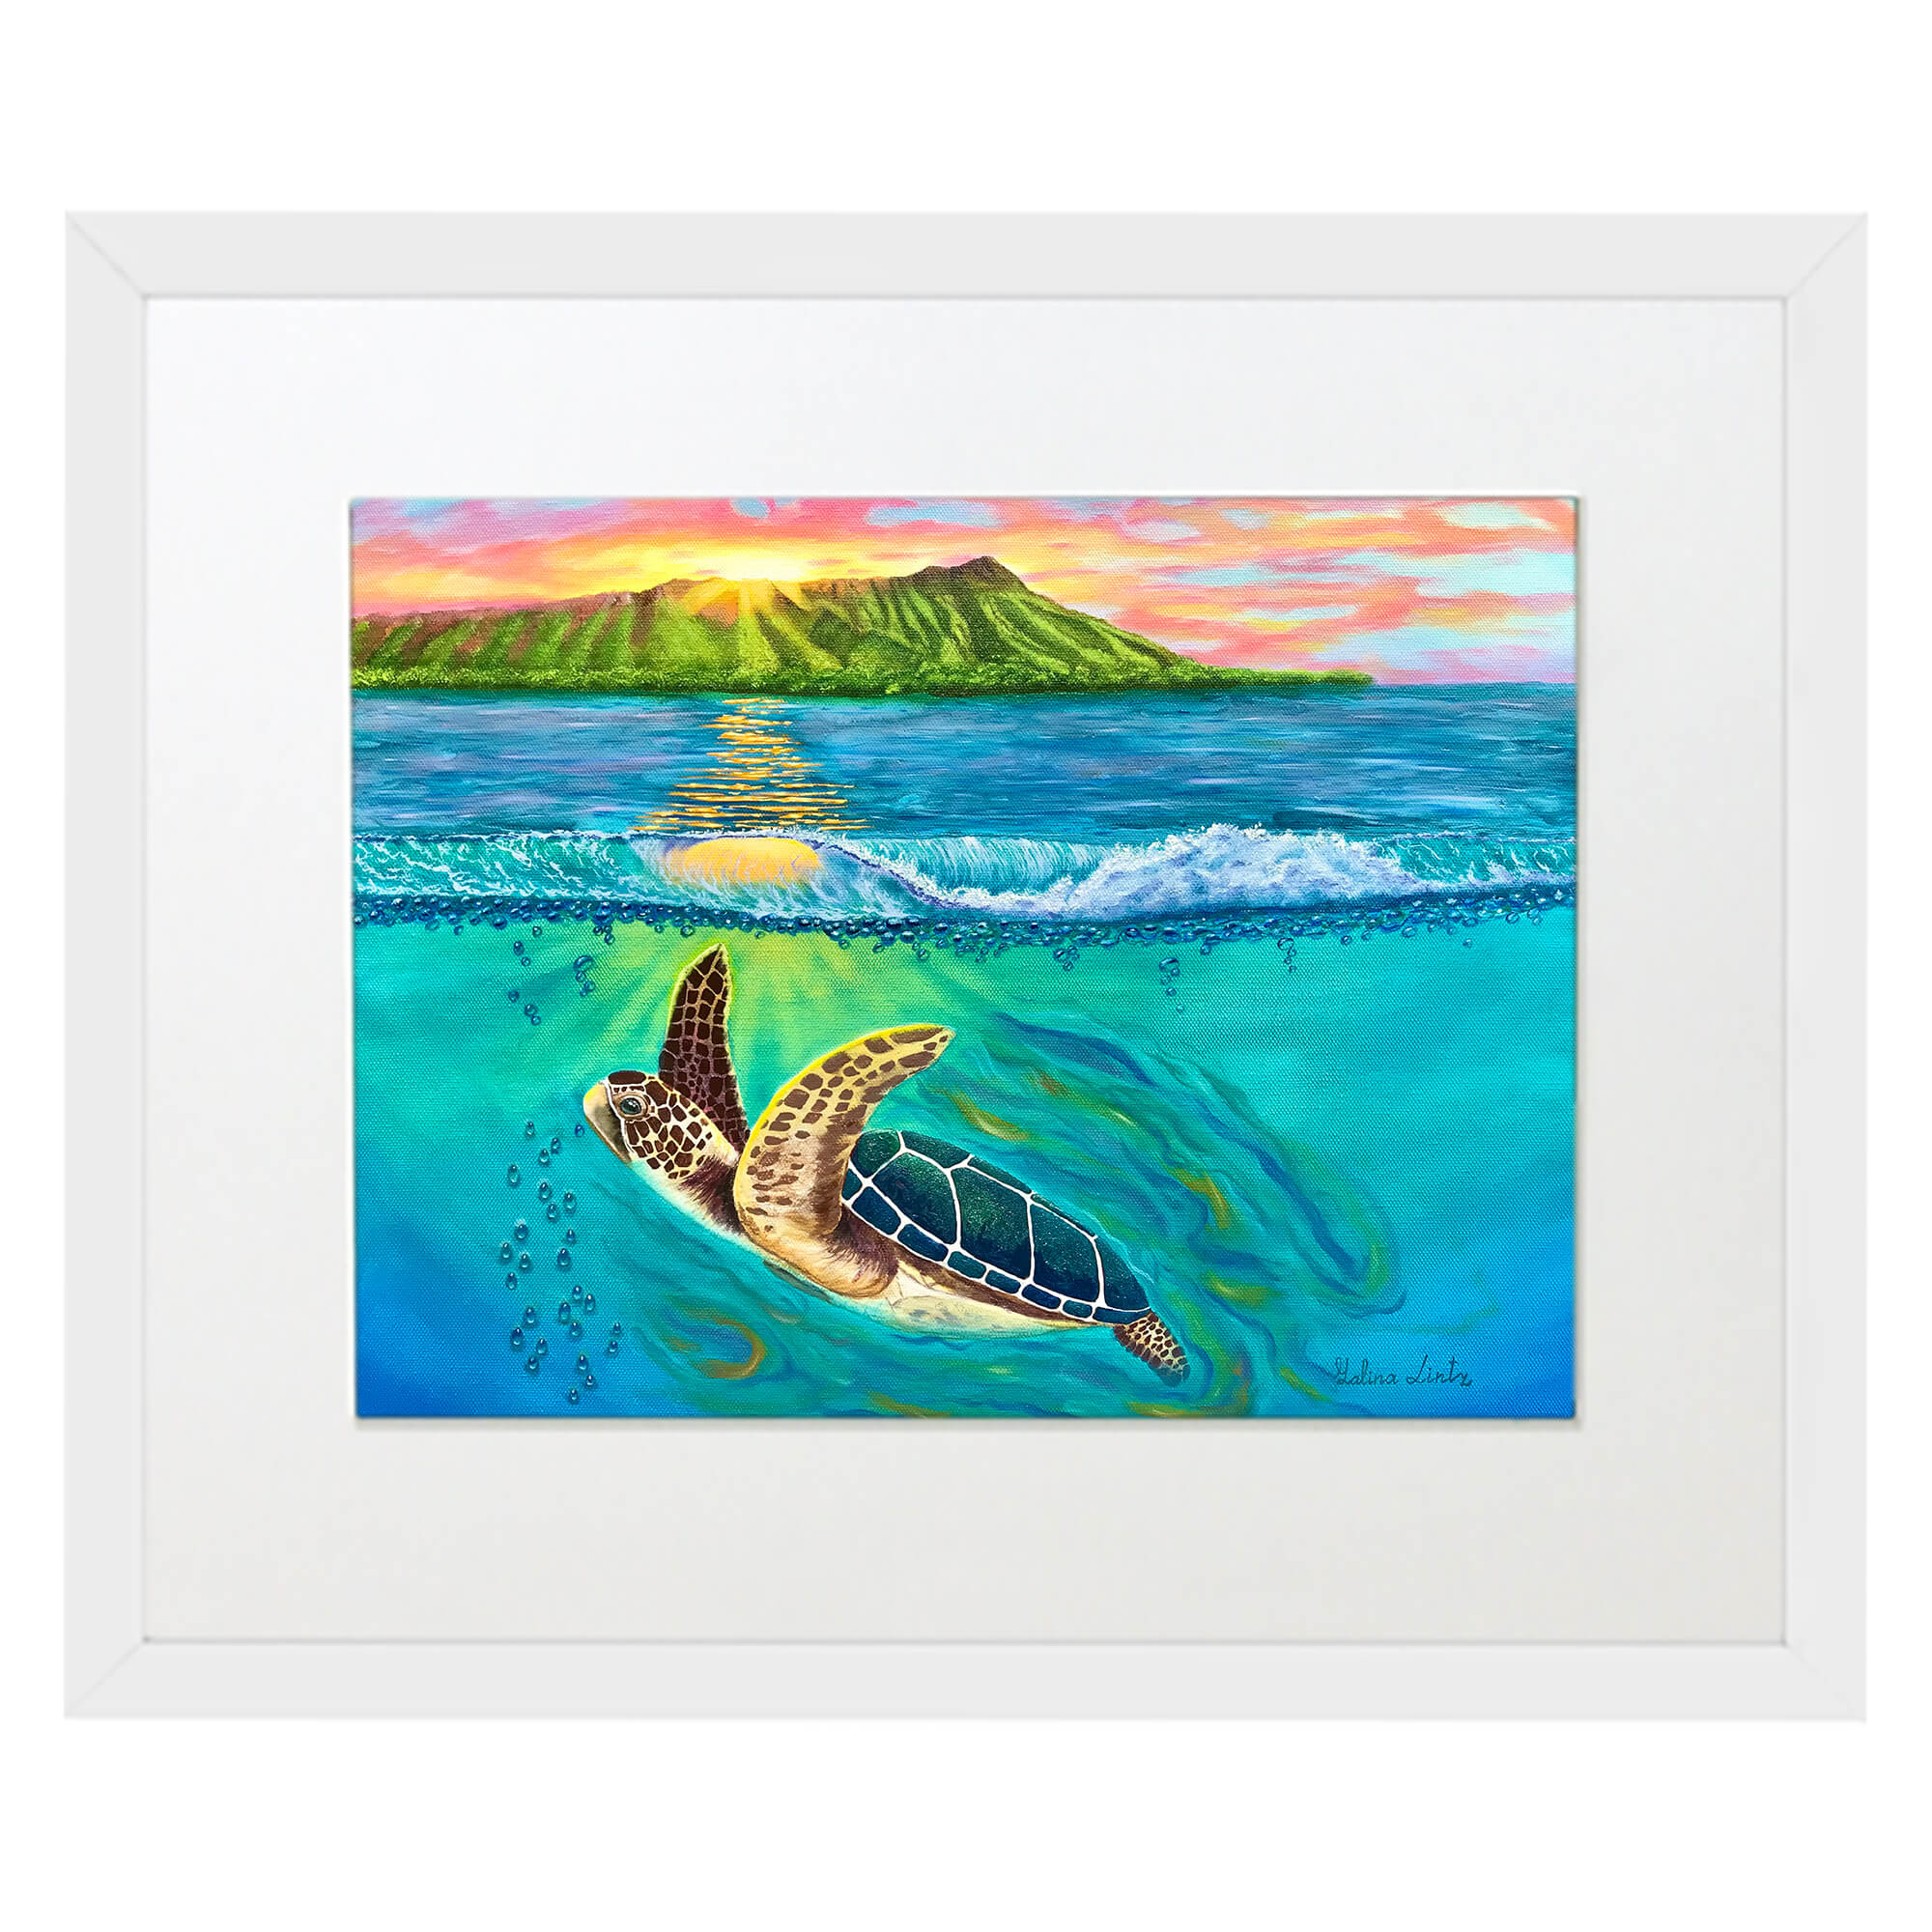 Matted art print with white frame showcasing the sunrise by hawaii artist Galina Lintz